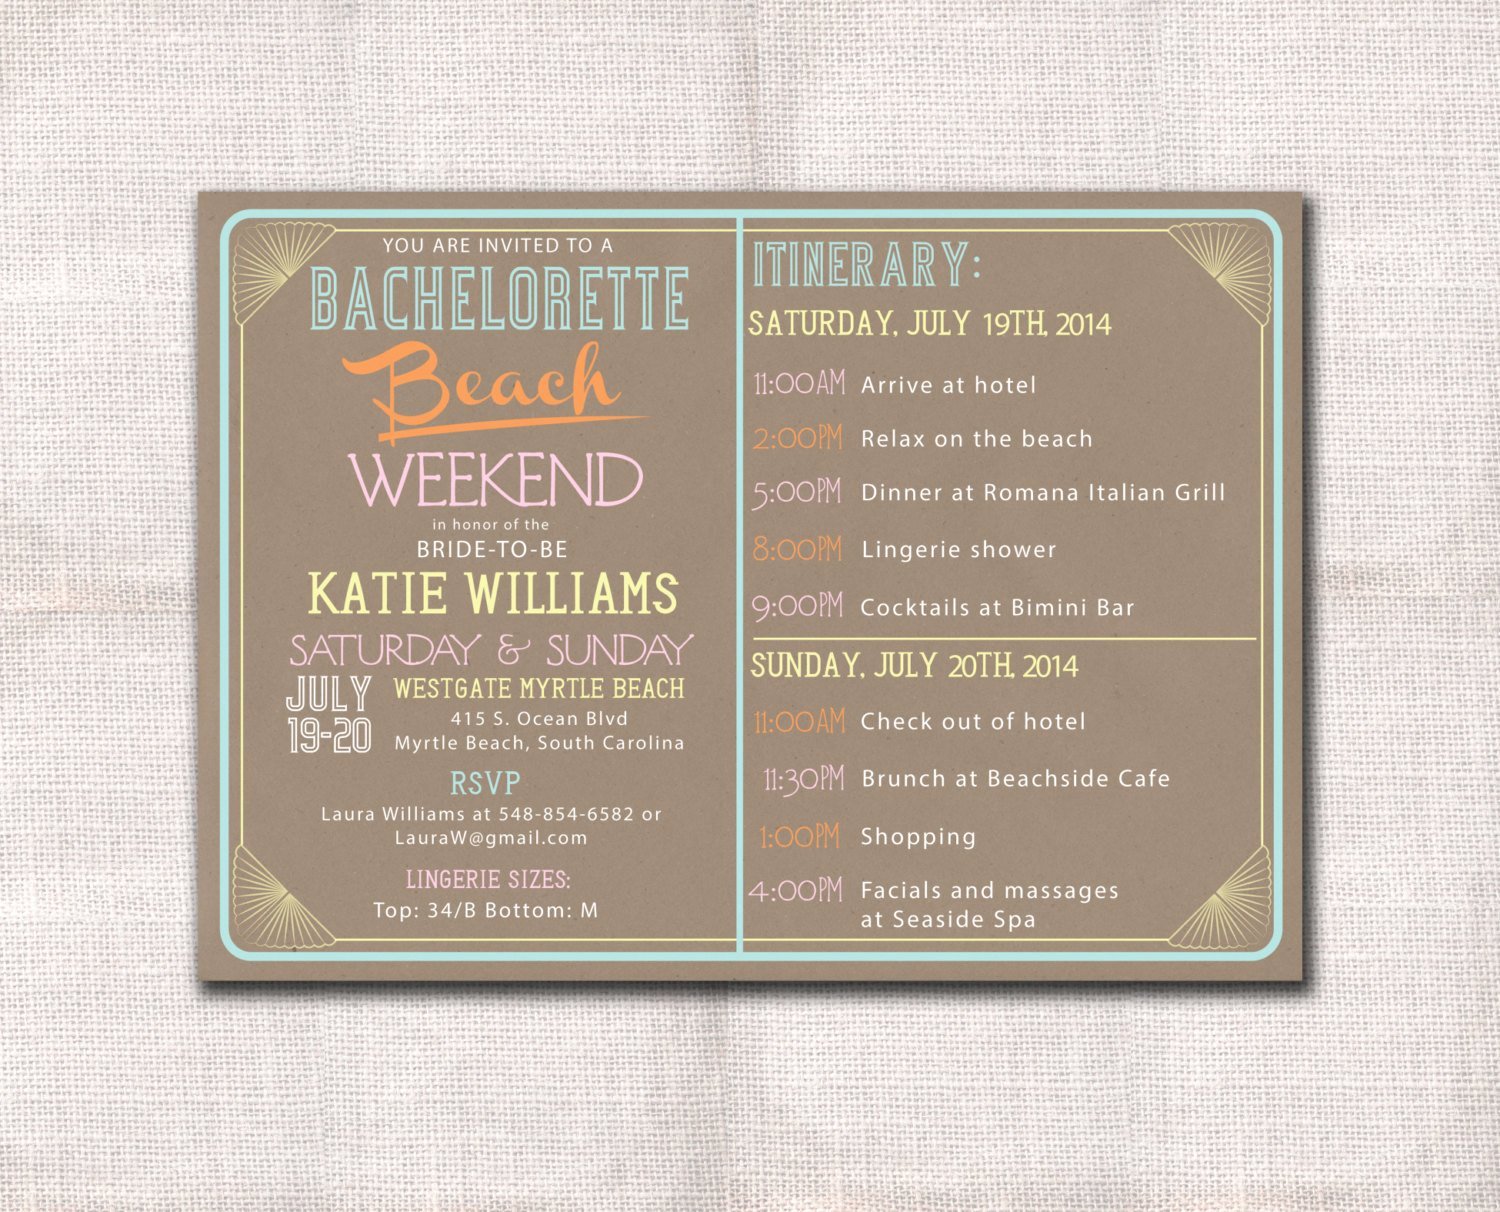 Bachelorette Party Weekend Invitation and Itinerary Custom